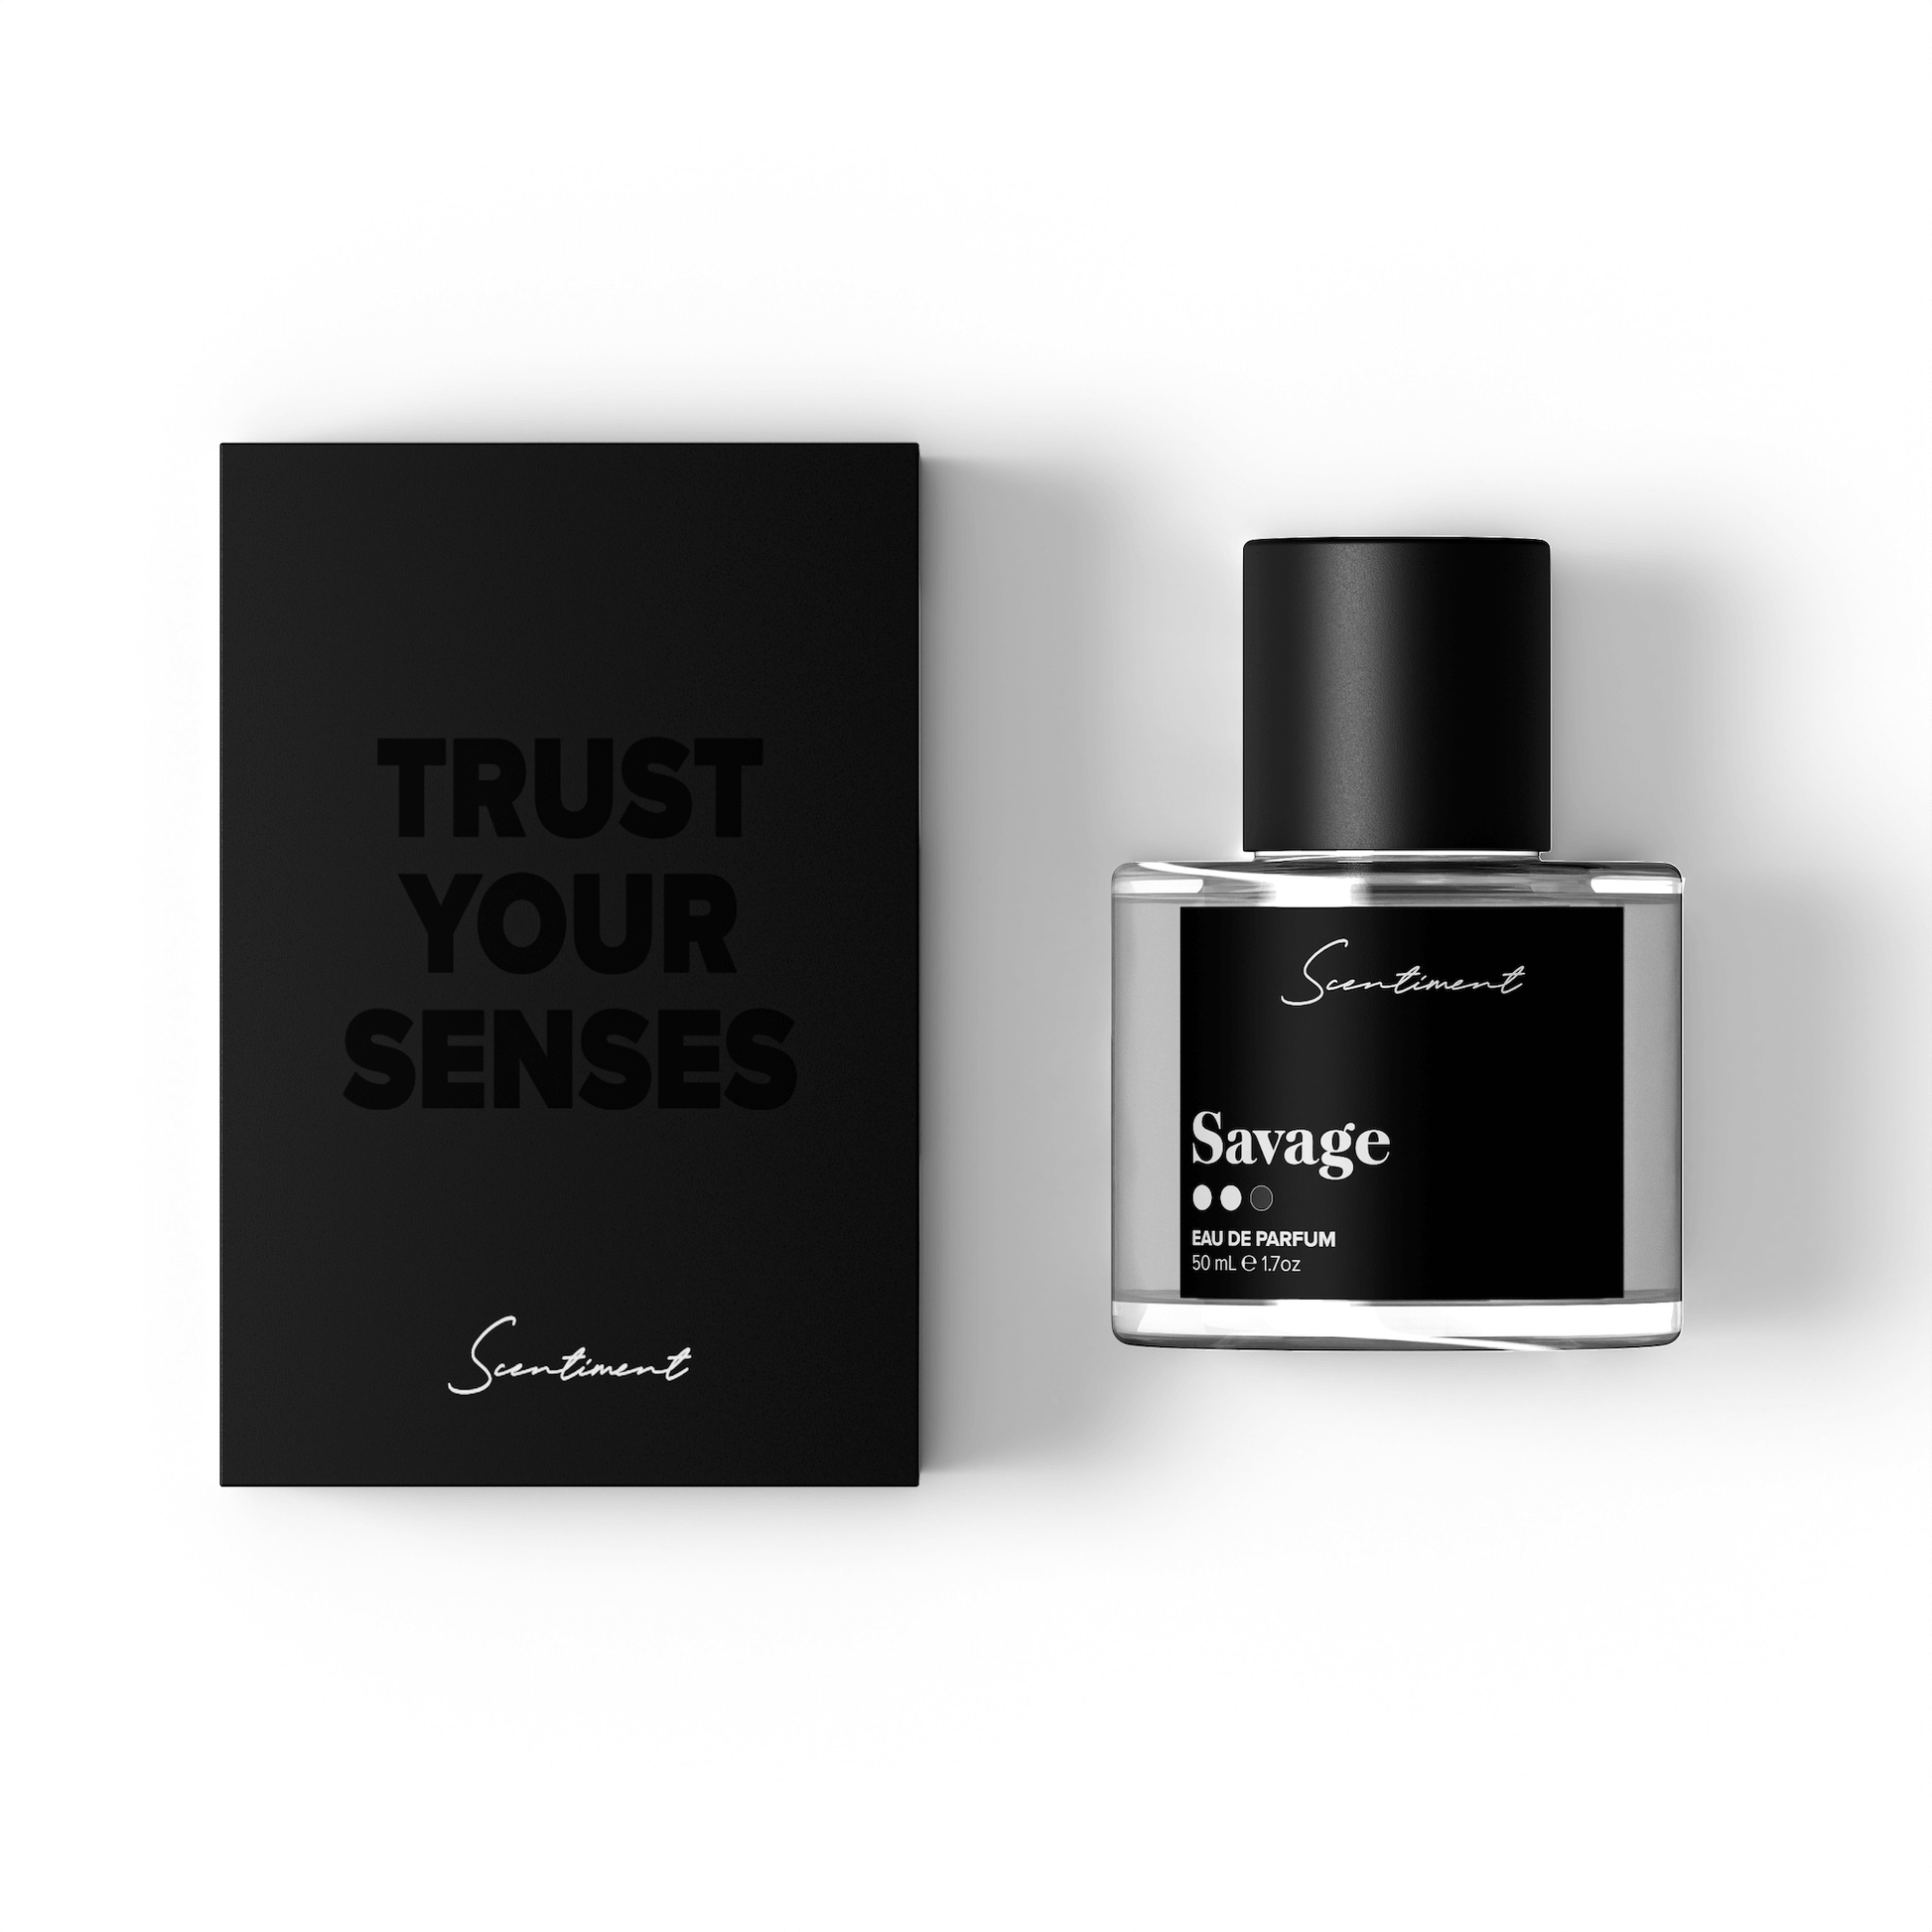 Savage Body Fragrance and Packaging, inspired by Dior Sauvage®